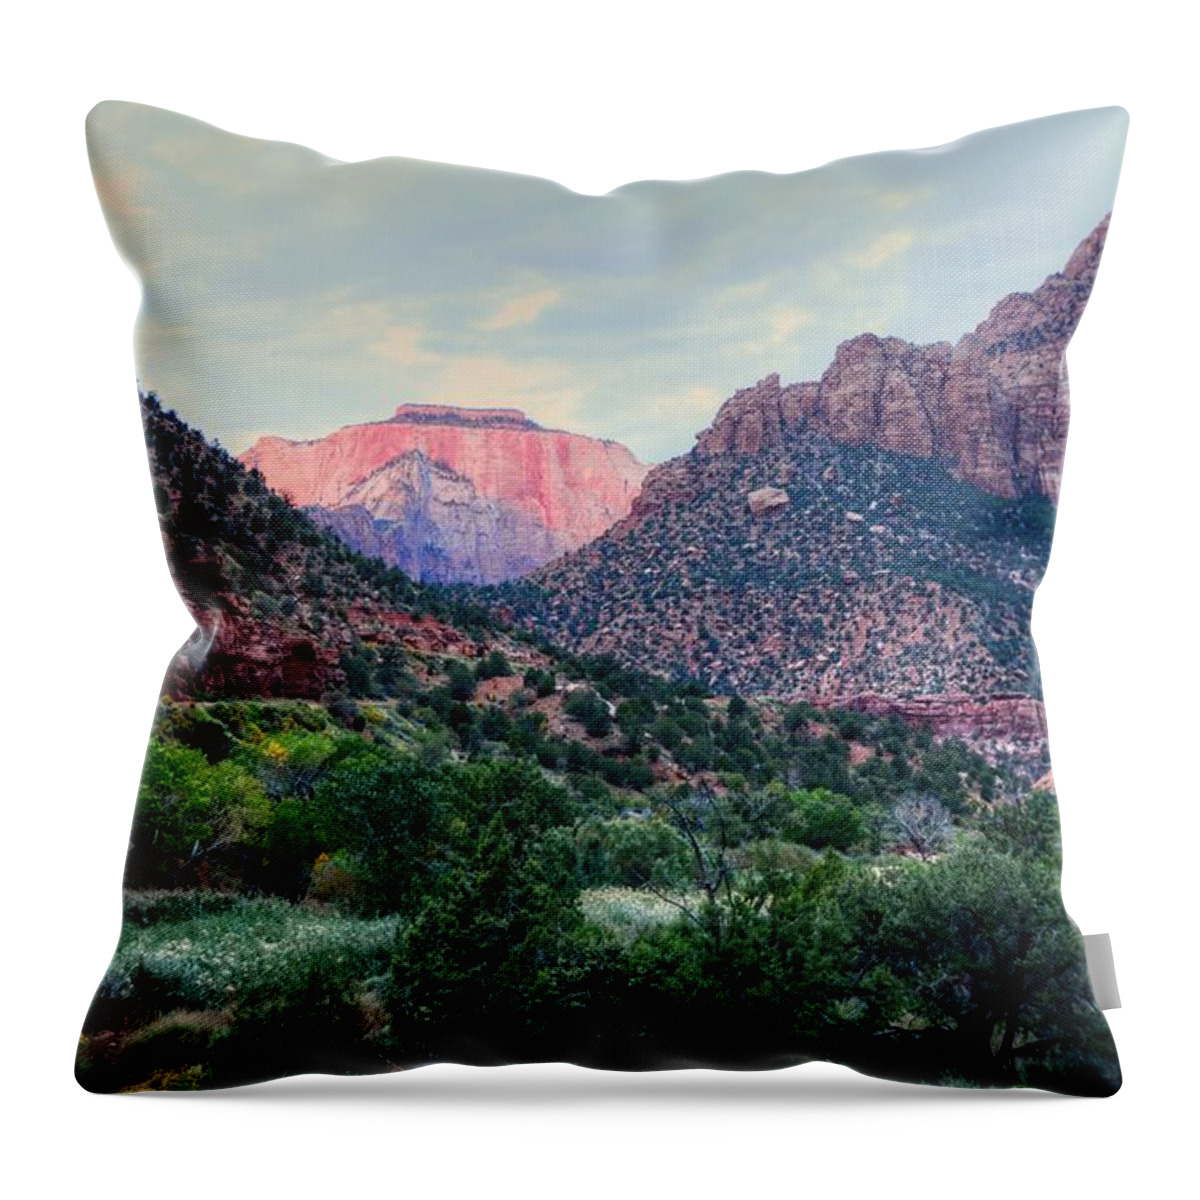 Zion National Park Throw Pillow featuring the photograph Zion National Park by Charlotte Schafer